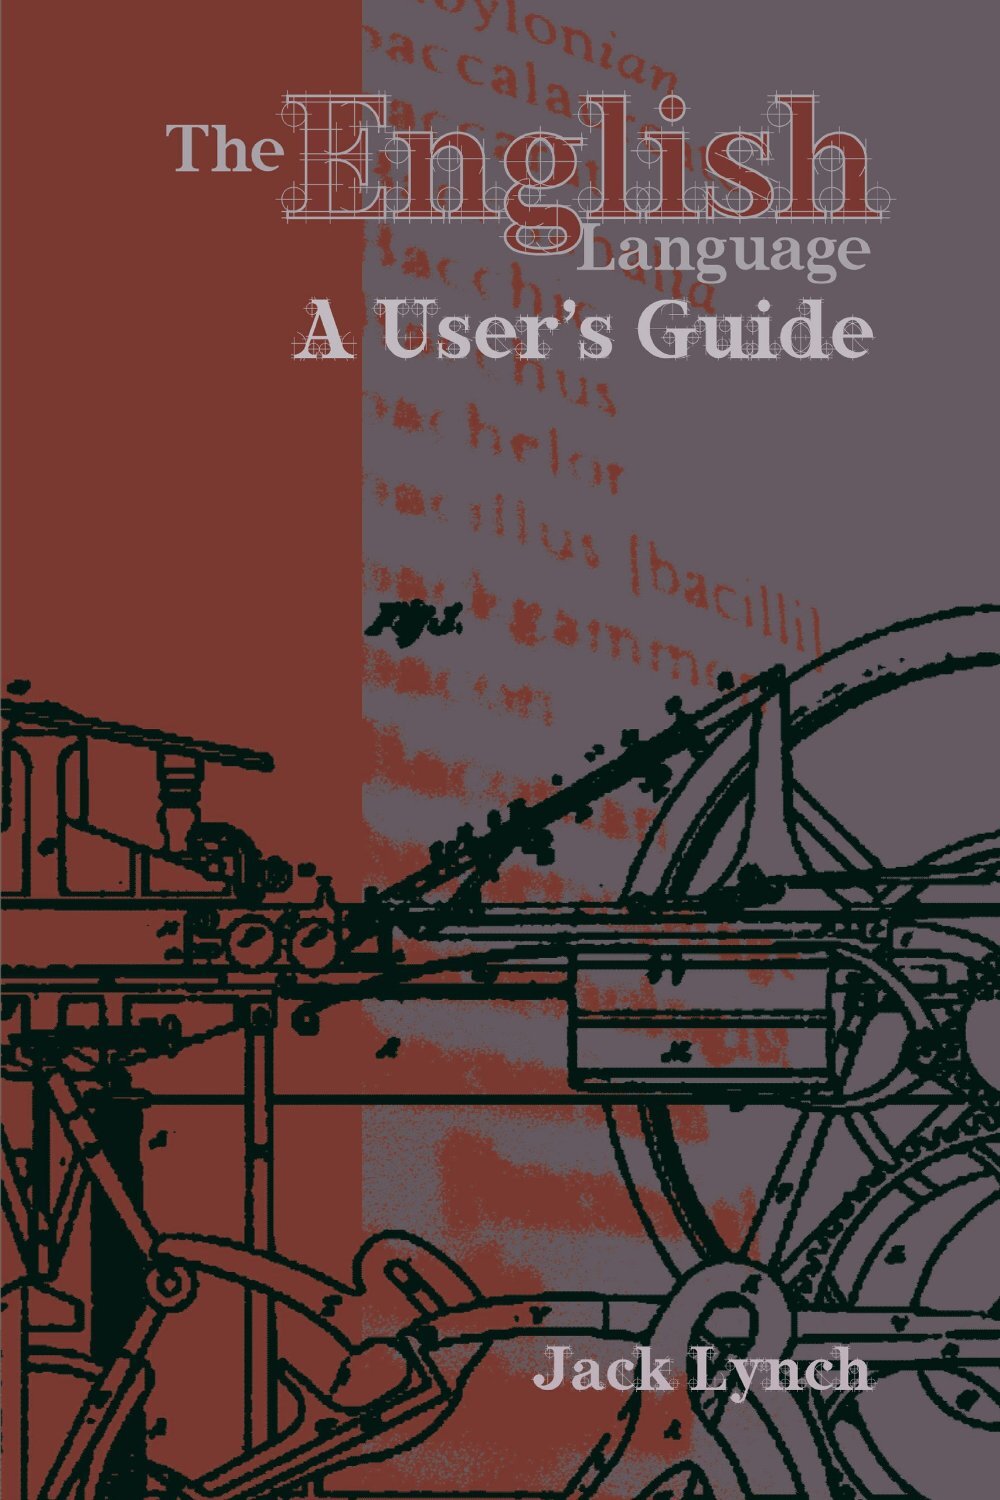 english a user's guide.jpg